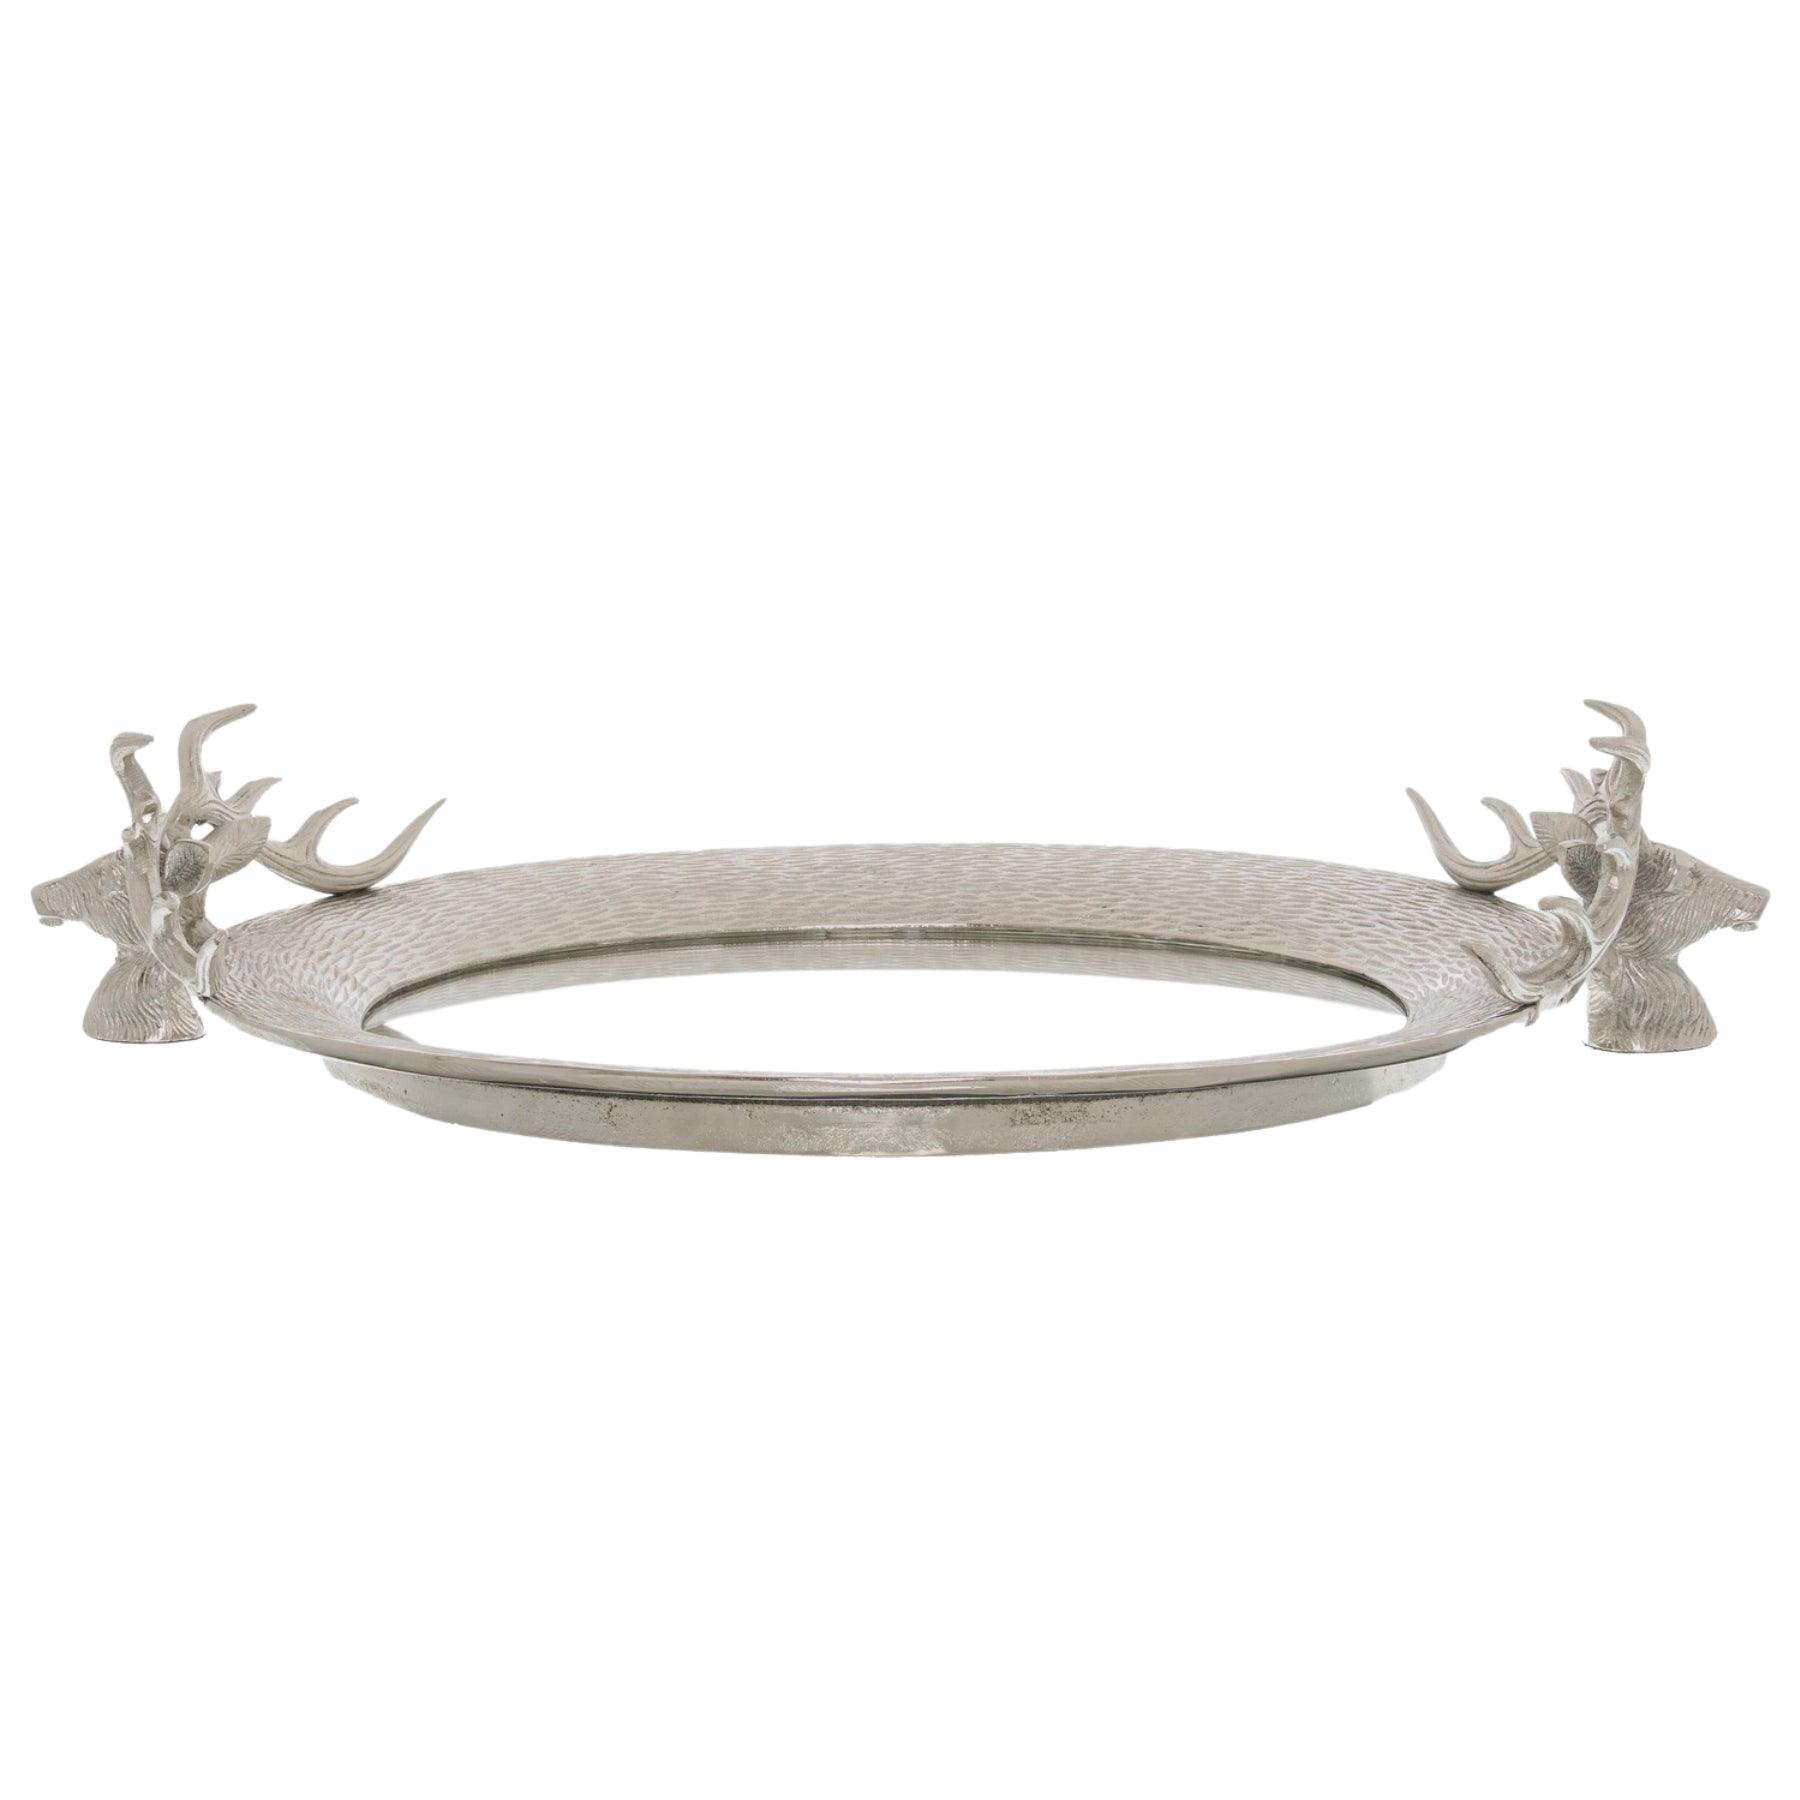 View Large Mirrored Tray With Stag Heads information